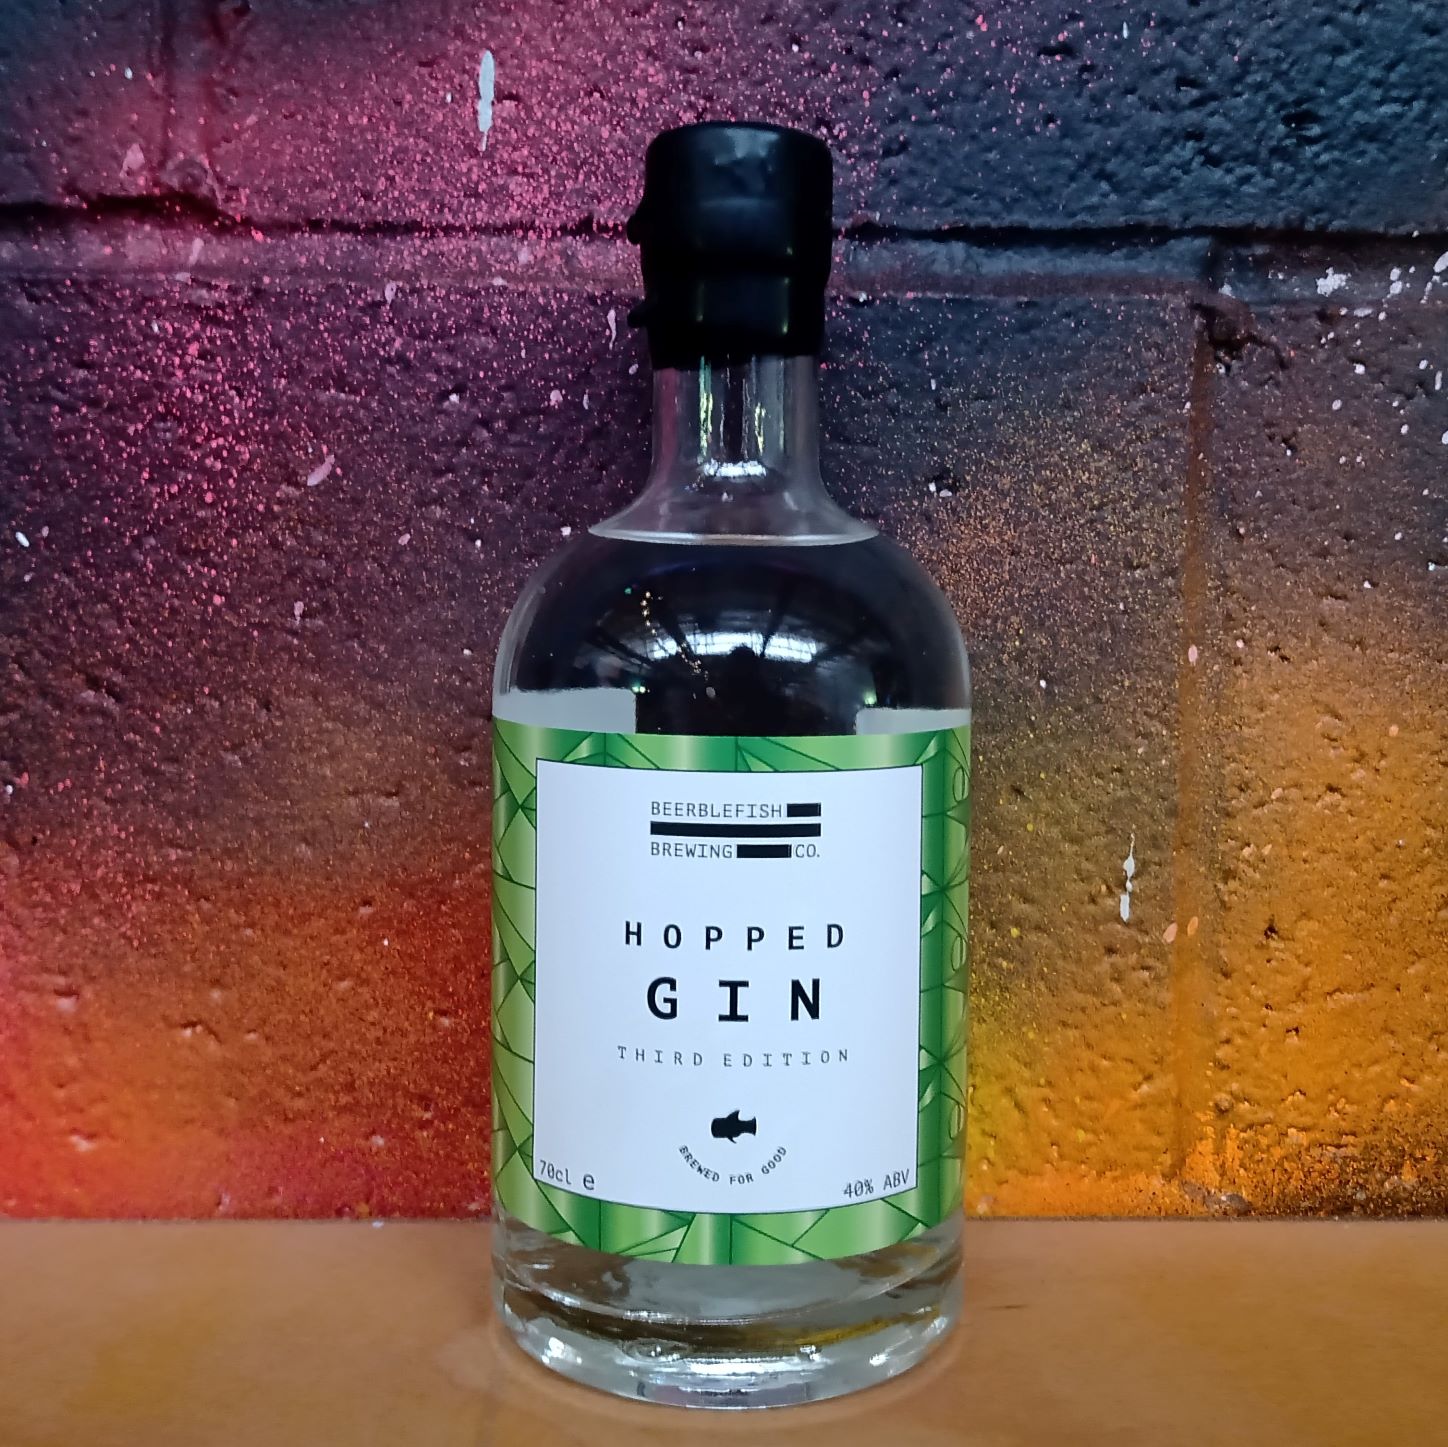 Third Edition Hopped Gin is here!